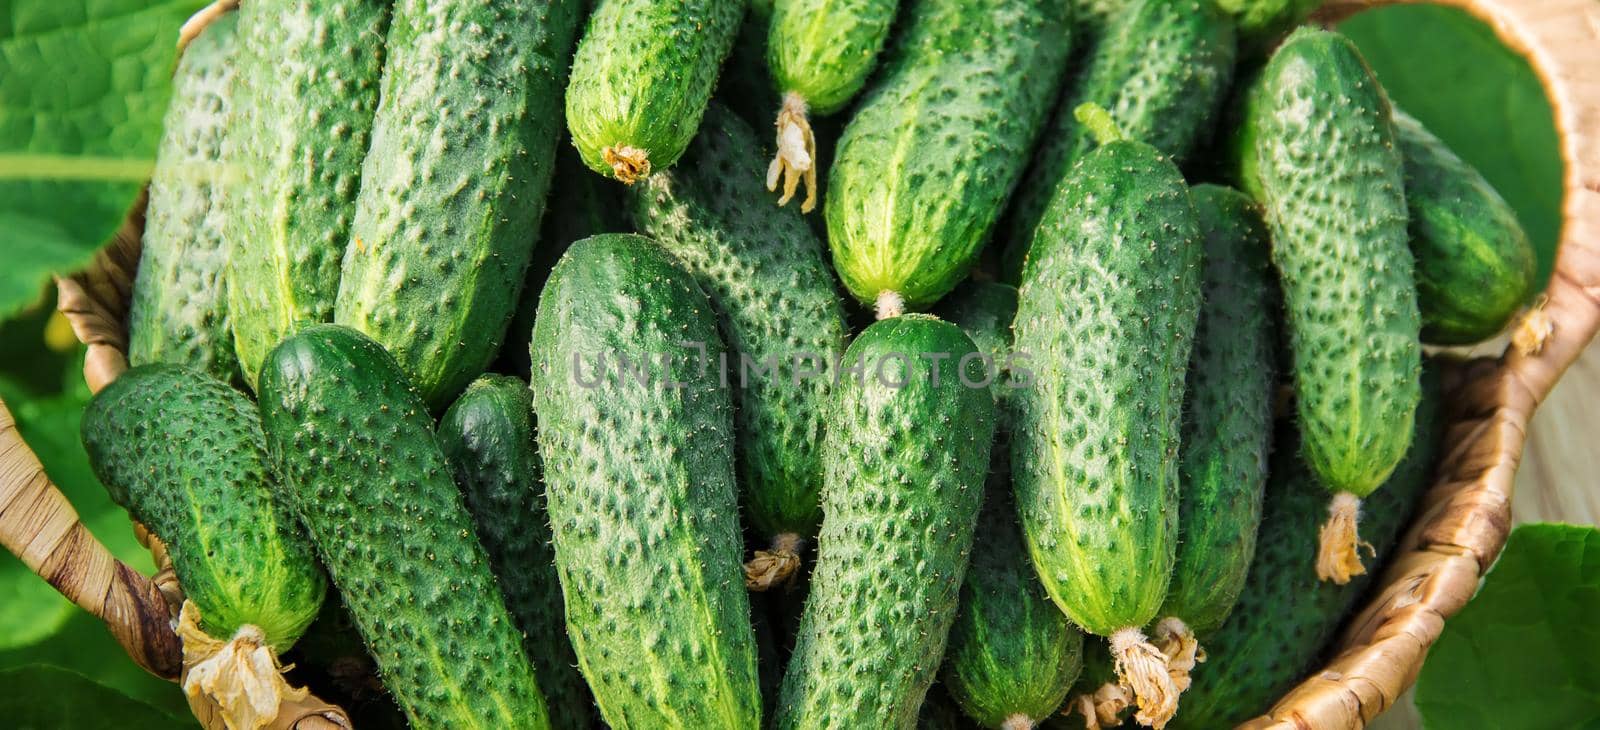 homemade cucumber cultivation and harvest. selective focus.